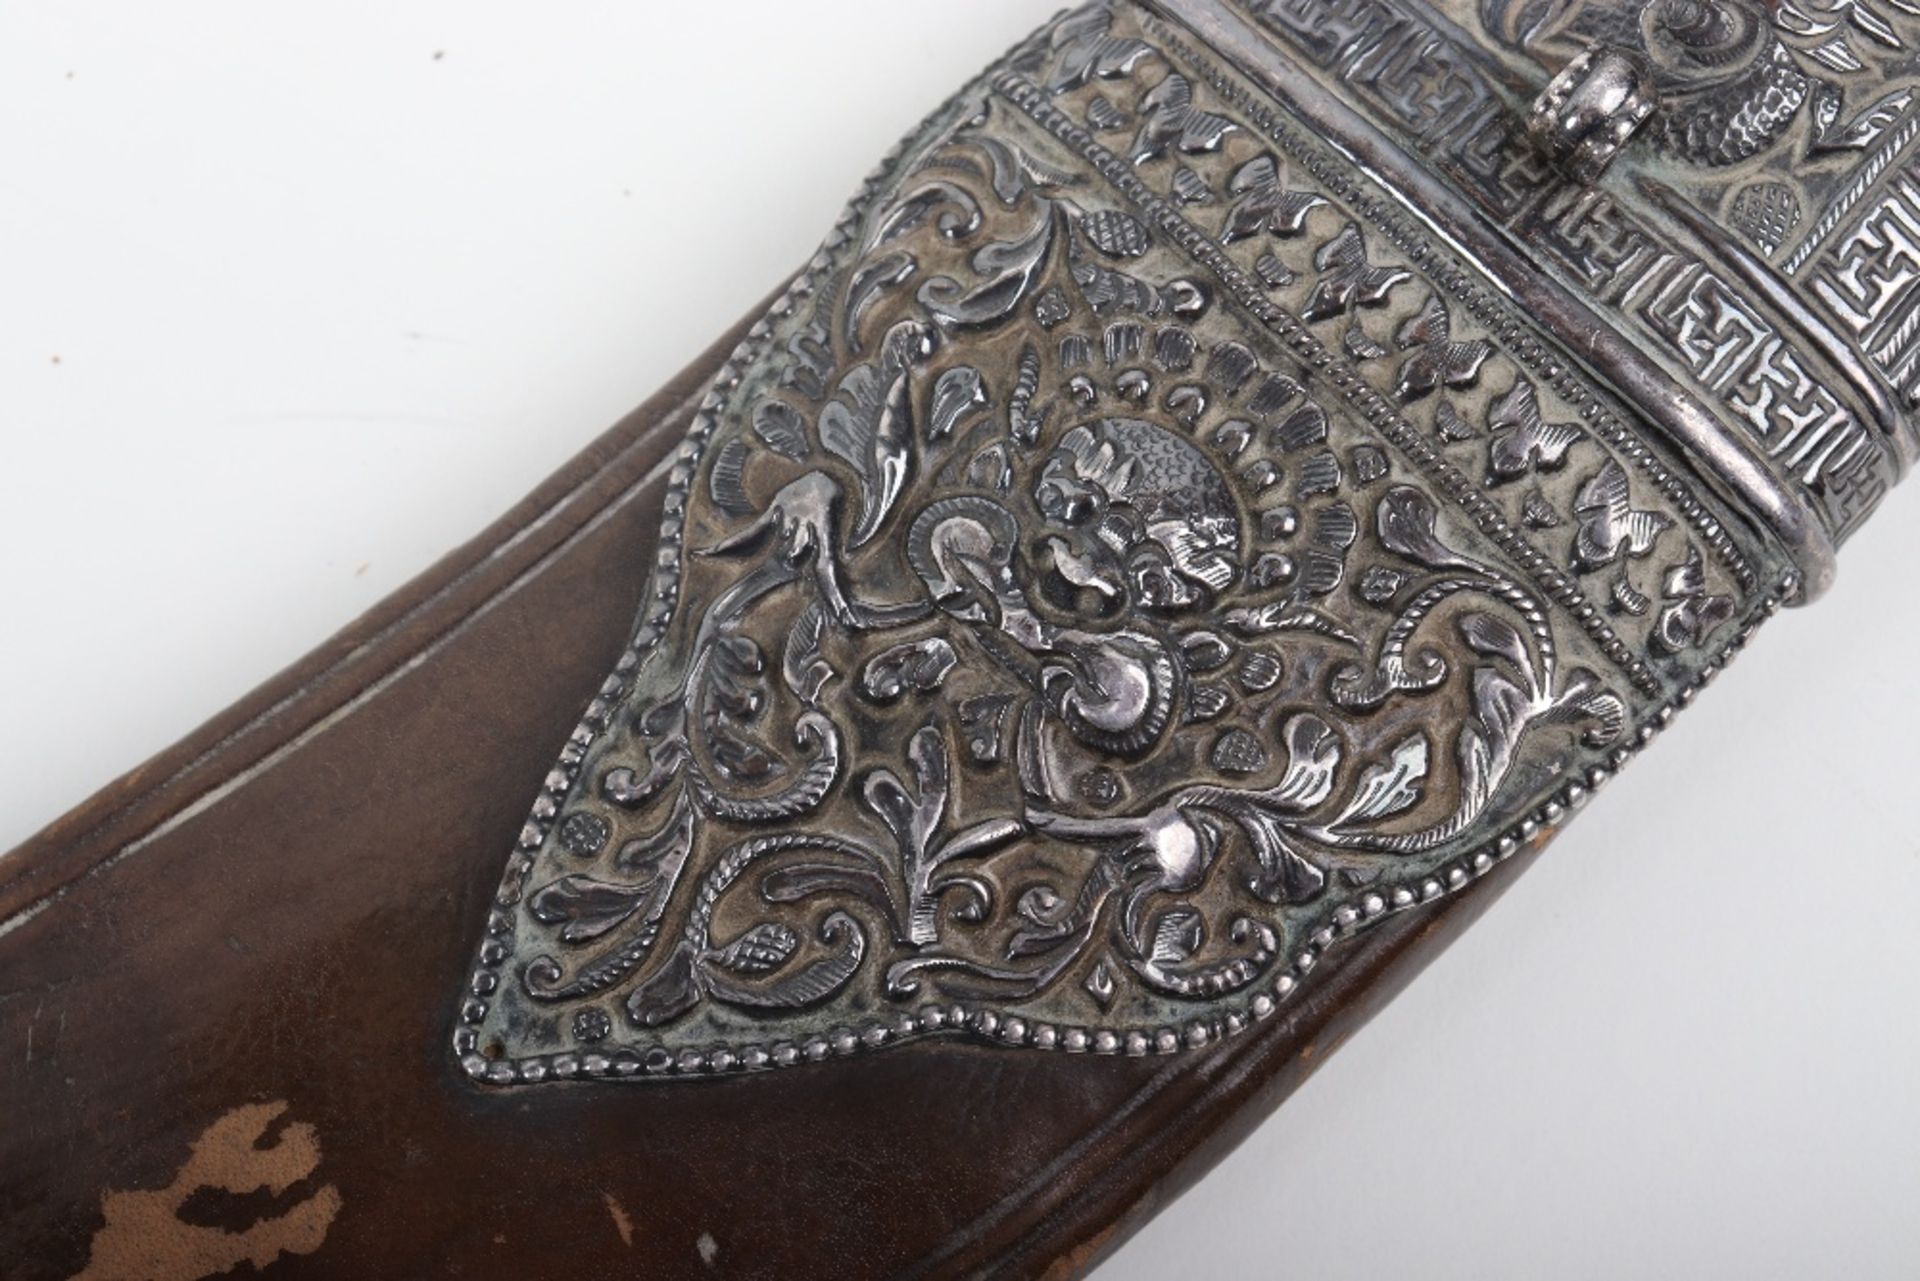 North Indian Silver Mounted Kukri, 19th Century - Image 4 of 9